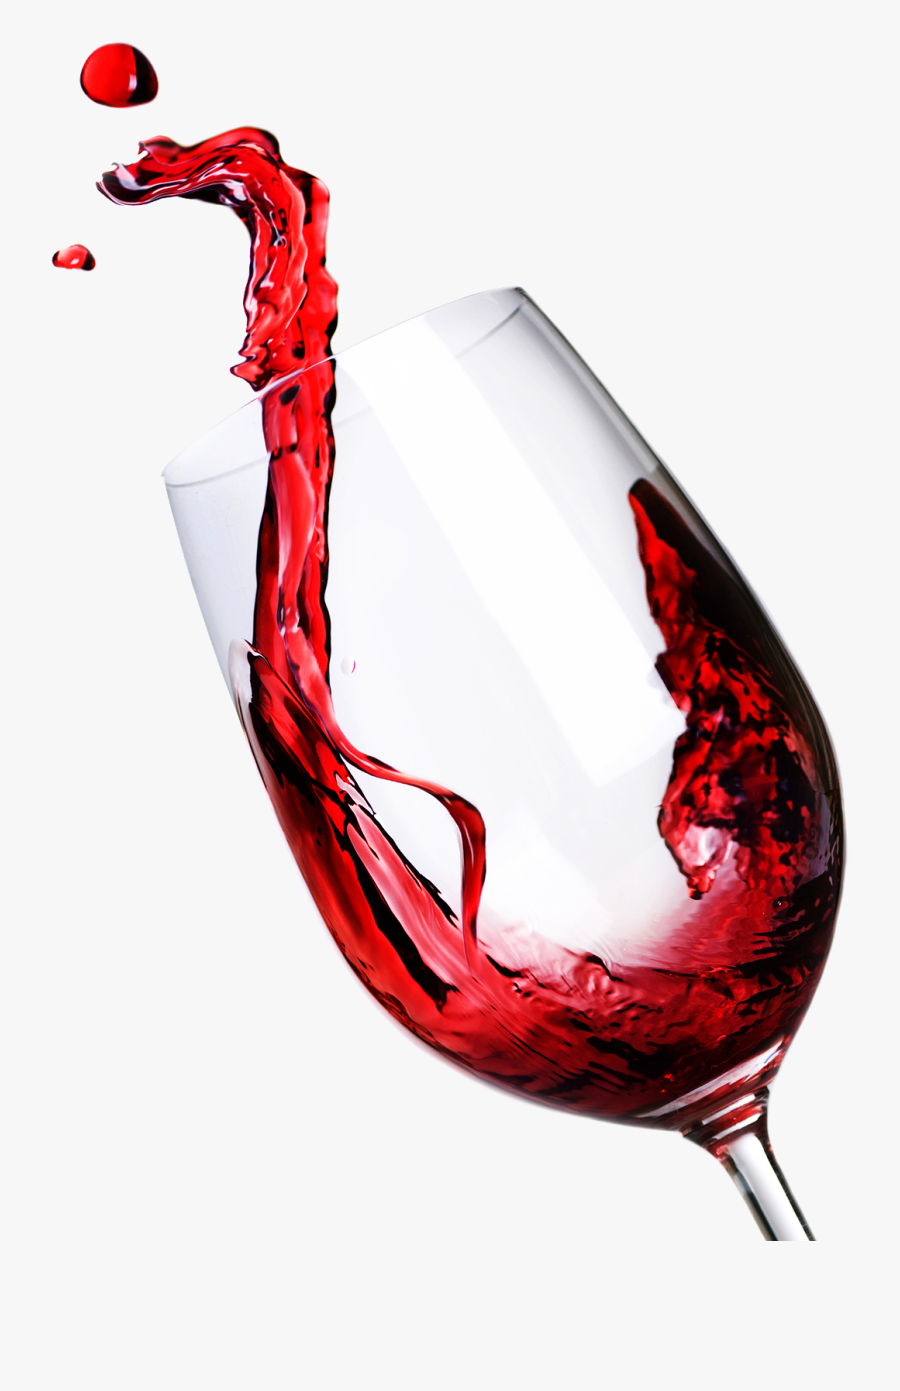 Wine Png Images Free - Wine Glass Top Transparent Background, Transparent Clipart